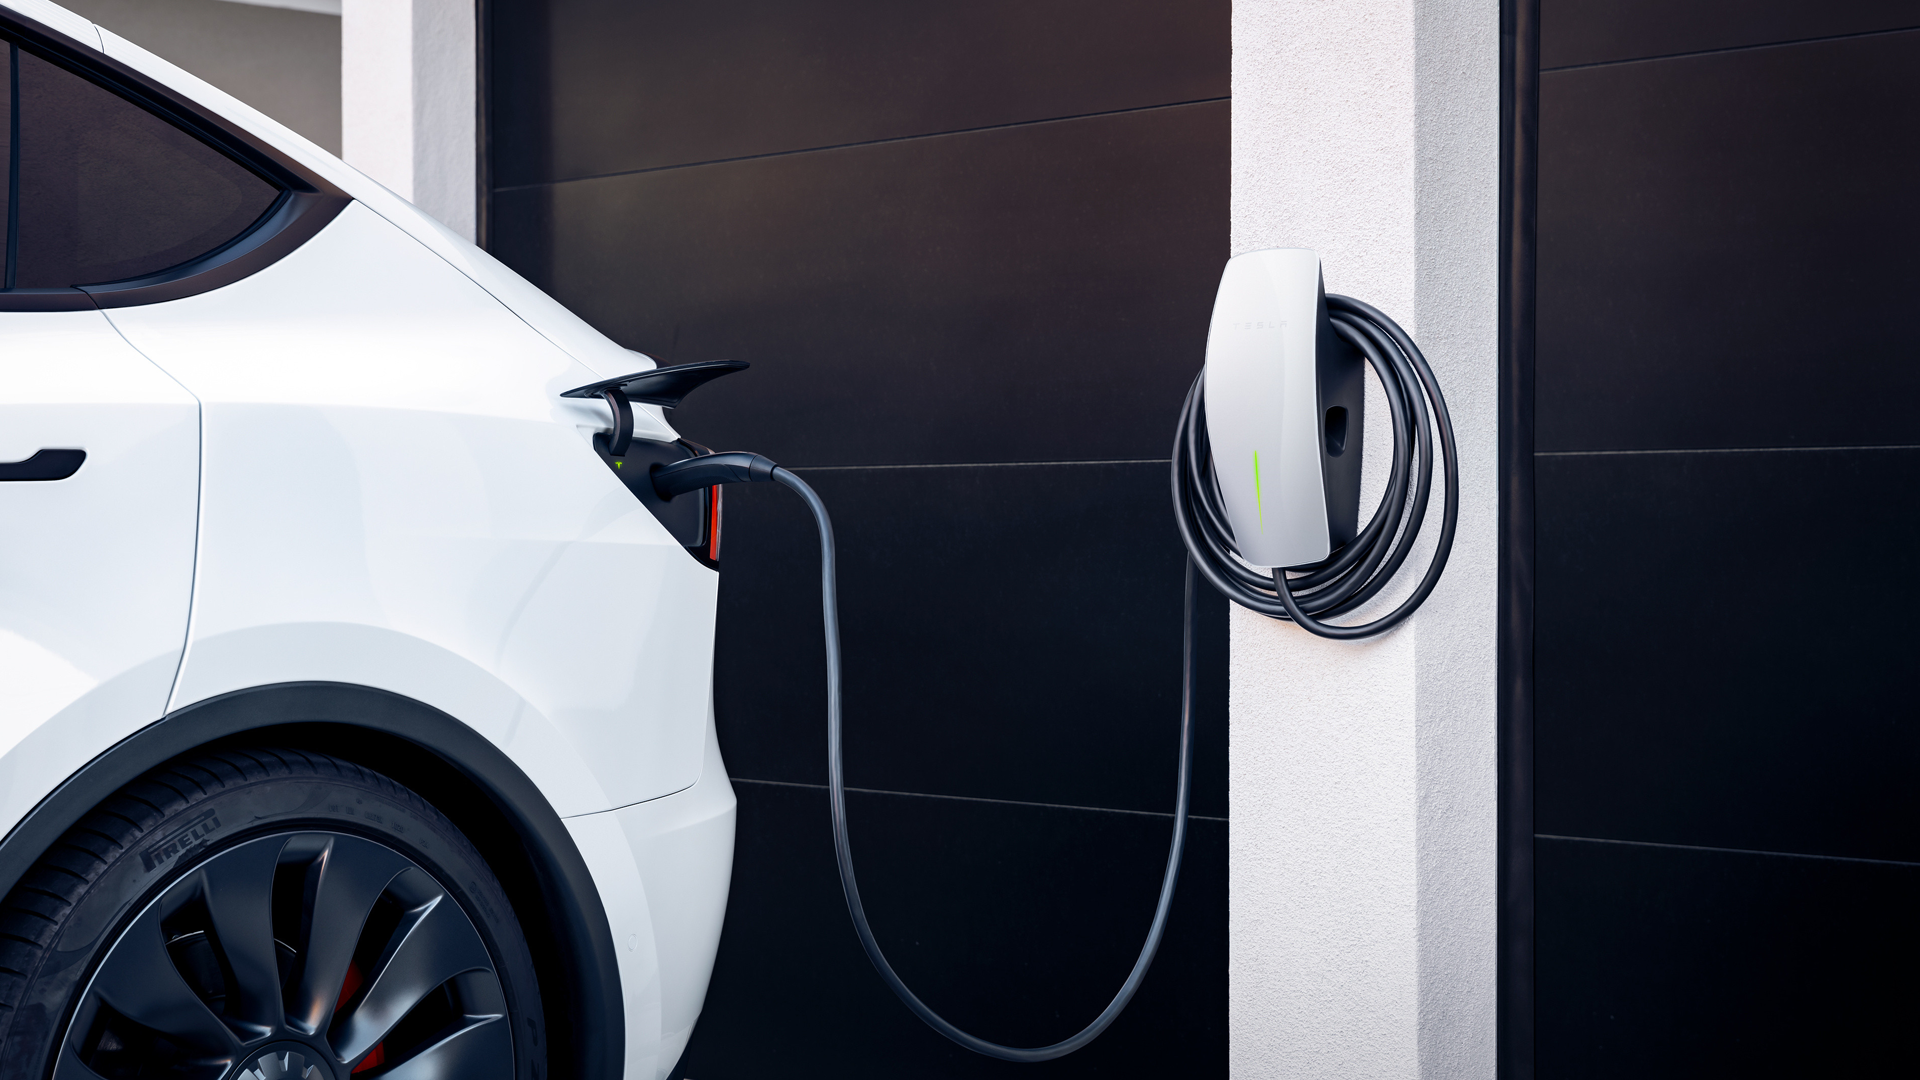 Electric vehicle charge help center